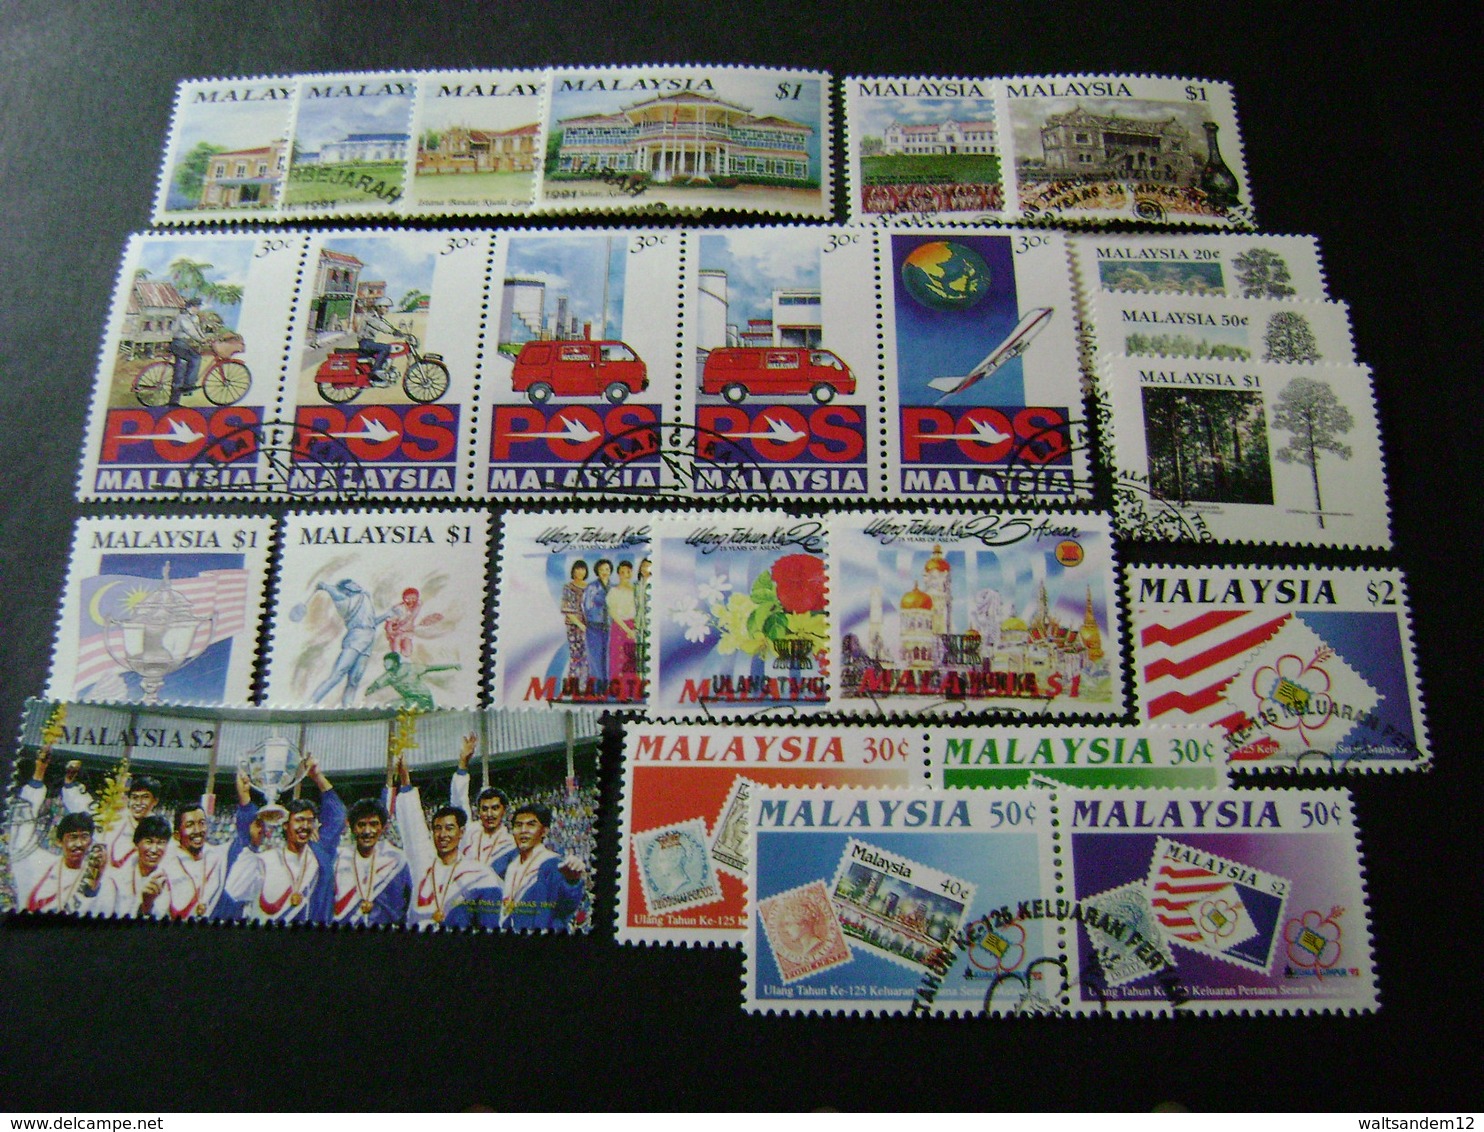 Malaysia 1990-1993 Complete Stamp Issues (SG 432-460, 462-496, Ms497, 498-519) 3 Images - Used - Malaysia (1964-...)